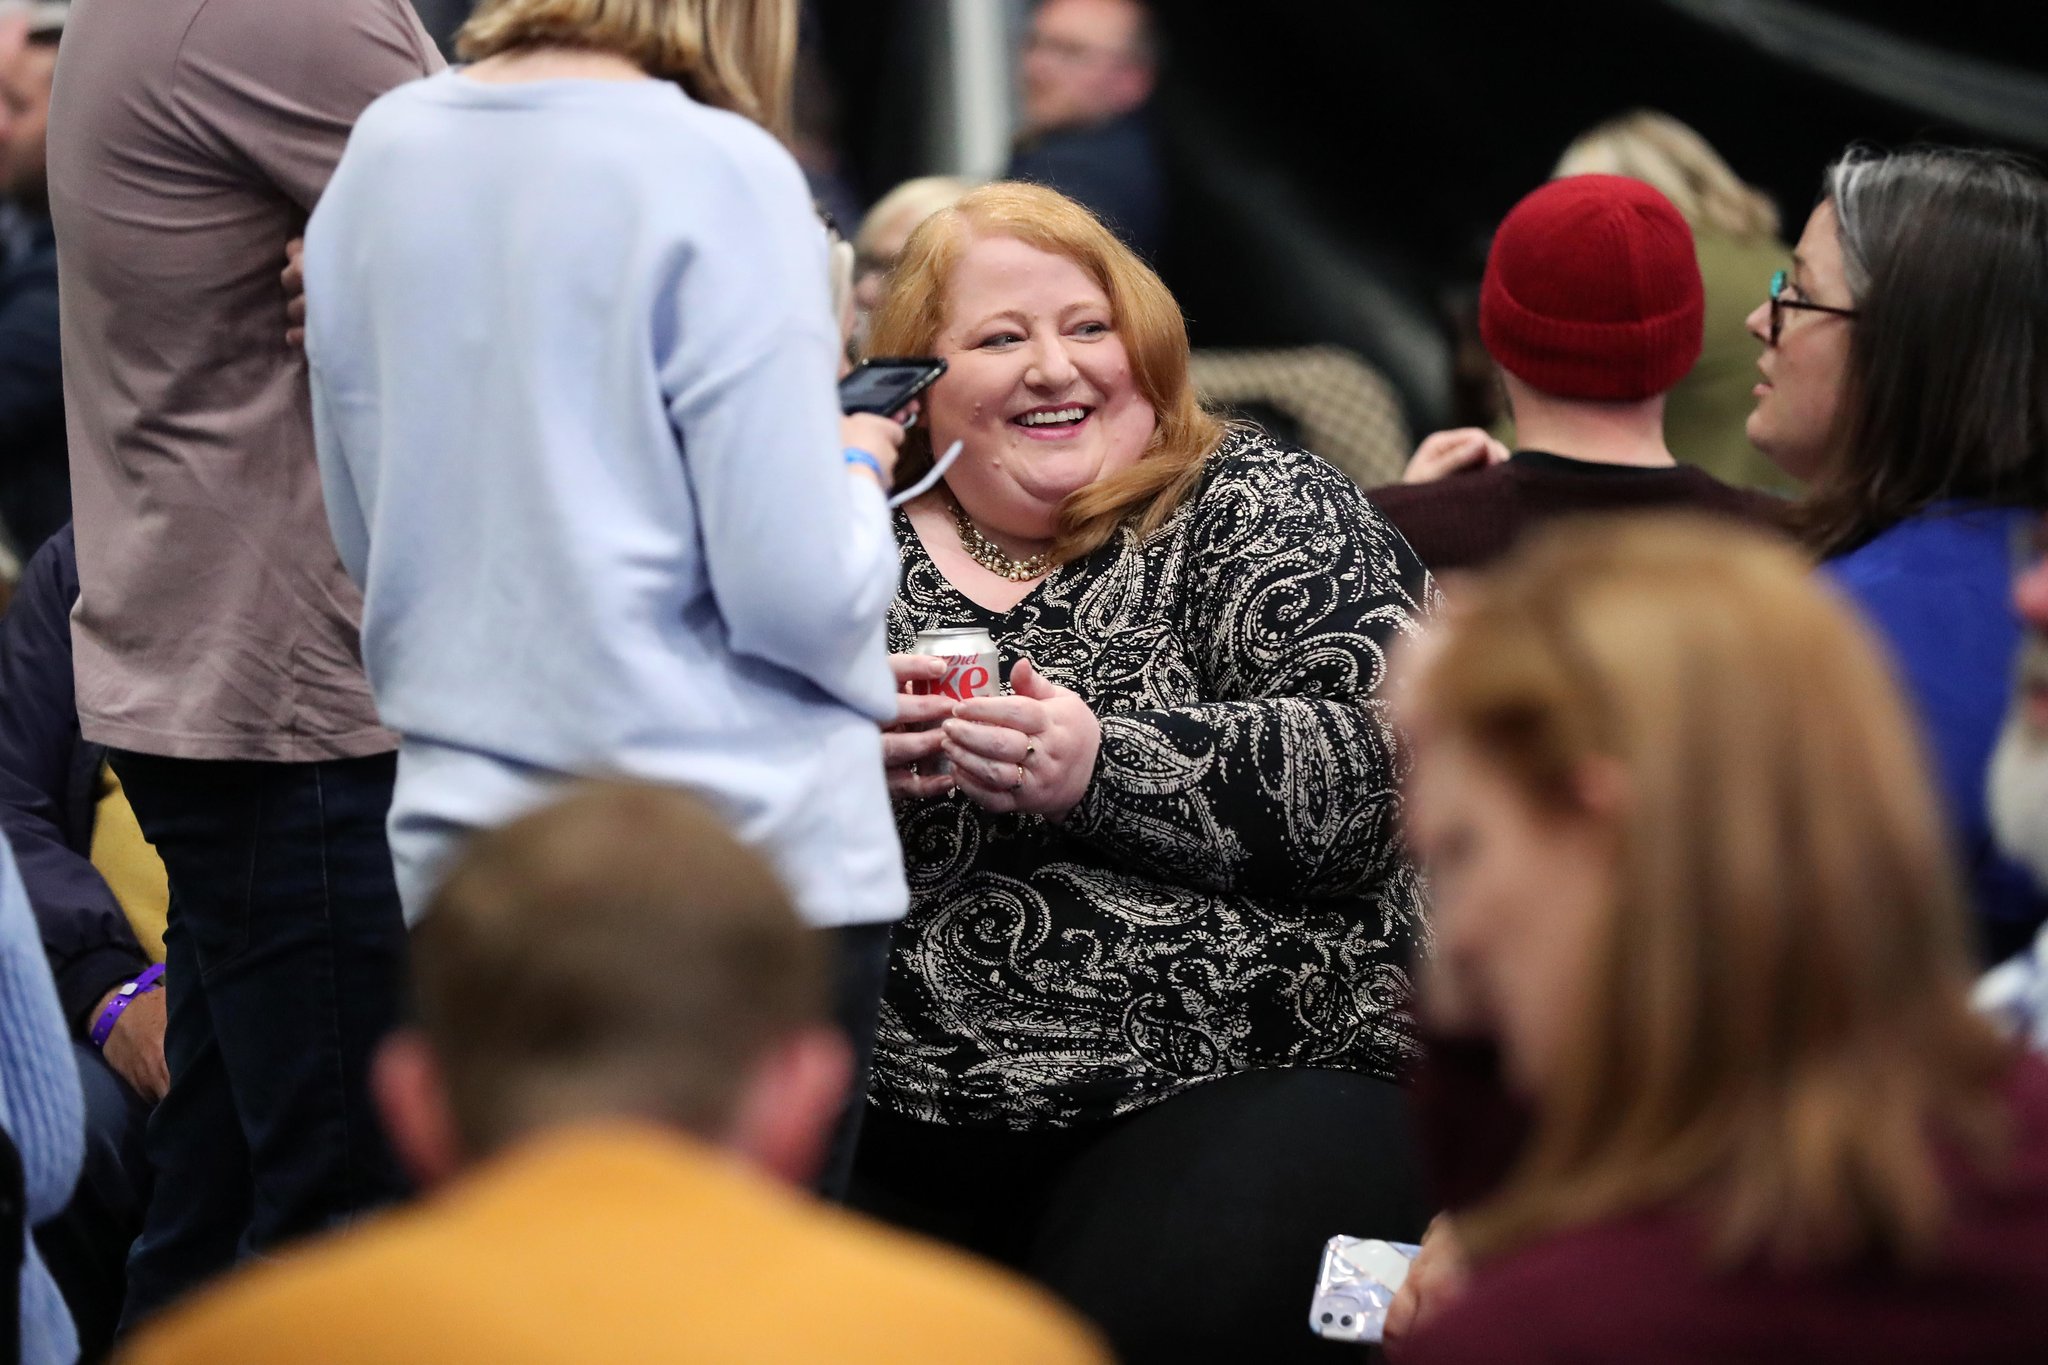 Election 2022: Looks like a good day for Alliance, says Naomi Long